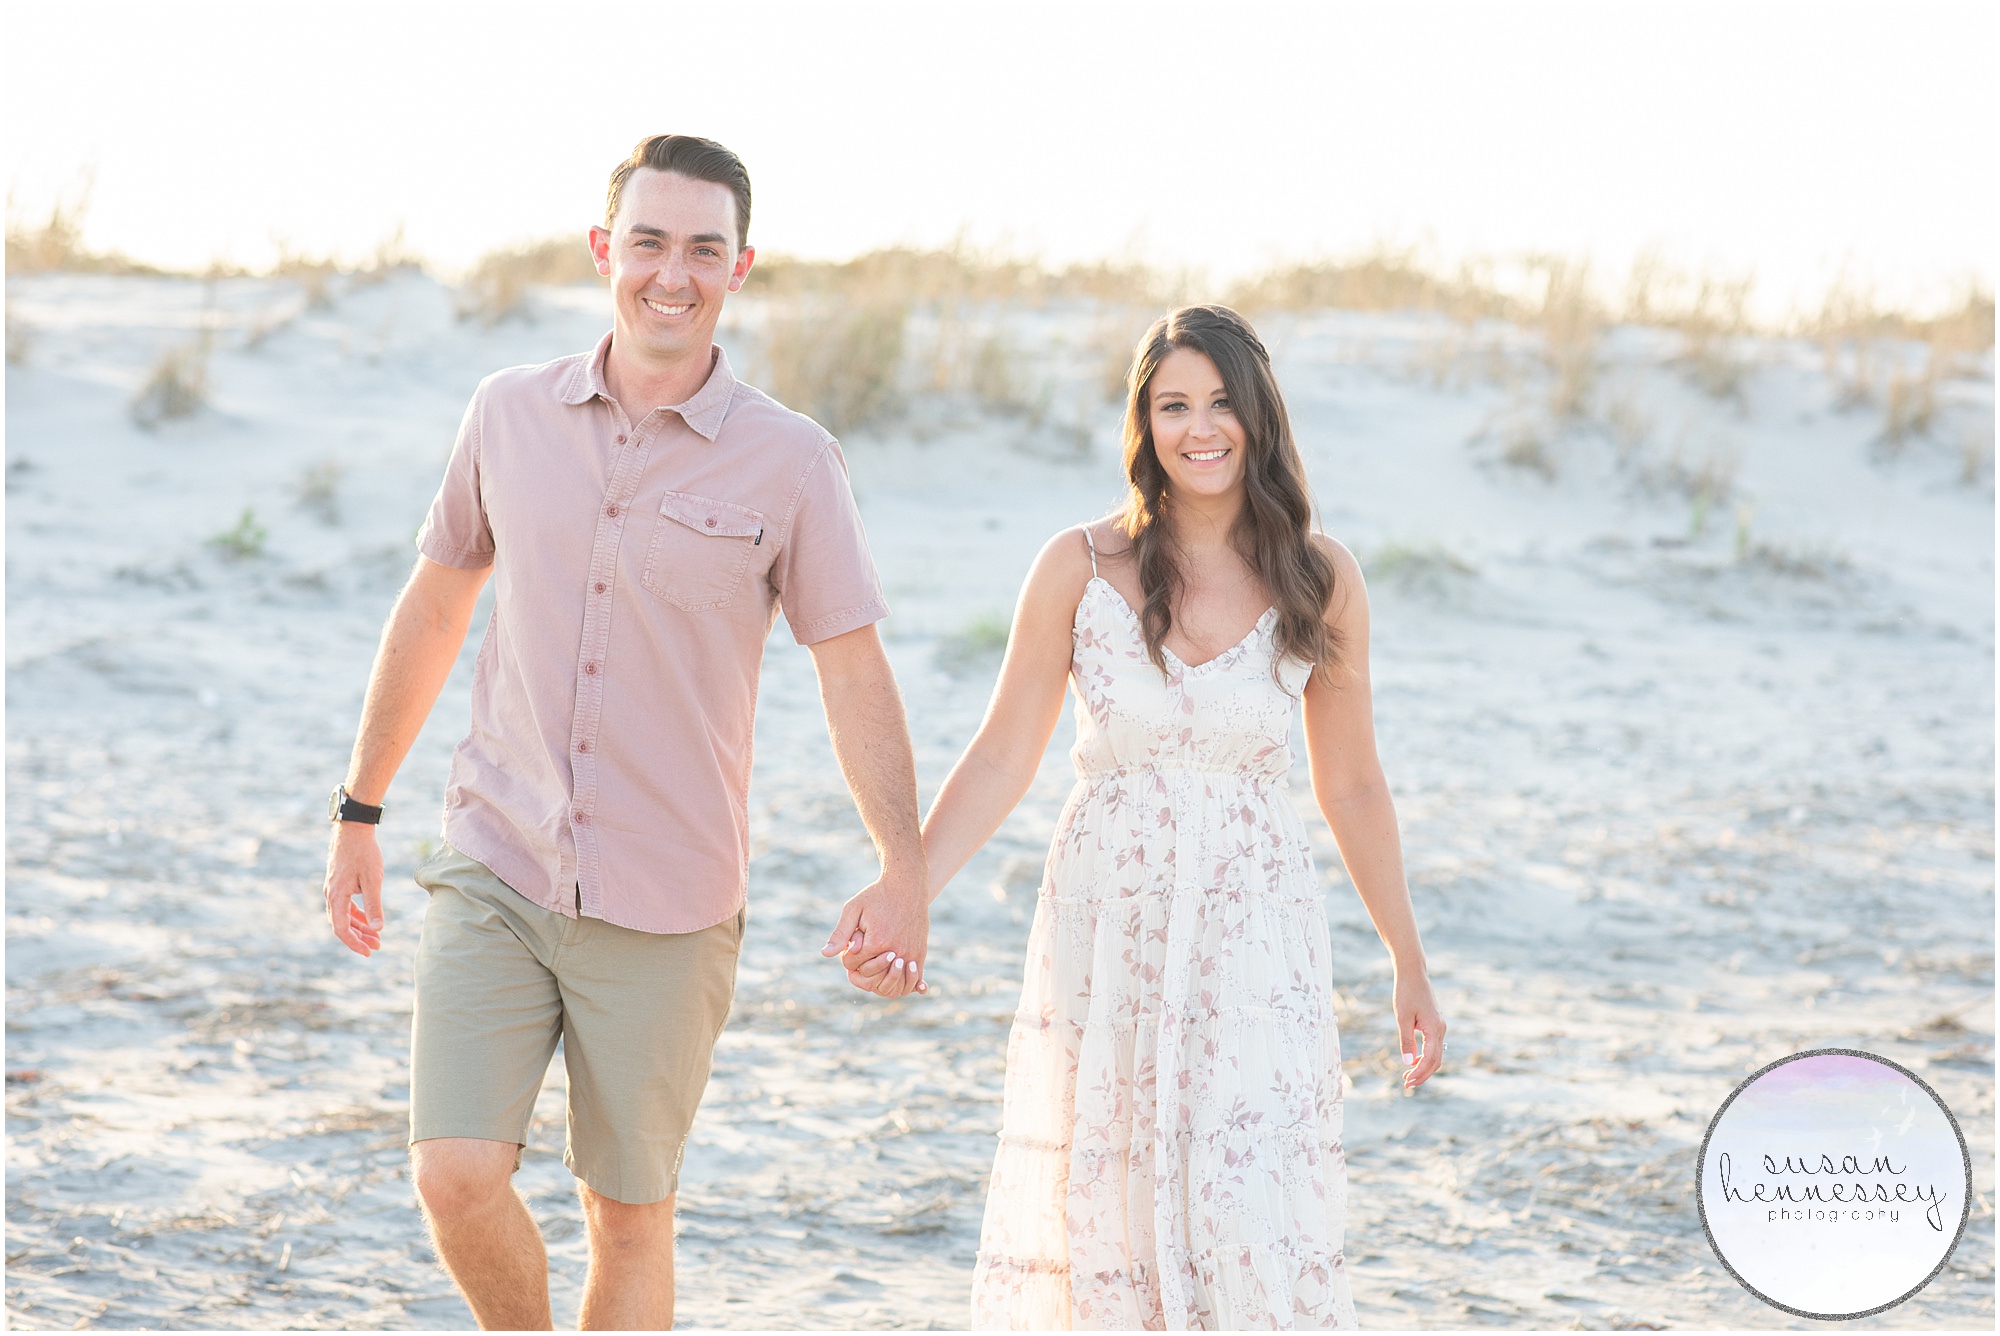 Corson's Inlet Engagement Session in Ocean City, NJ